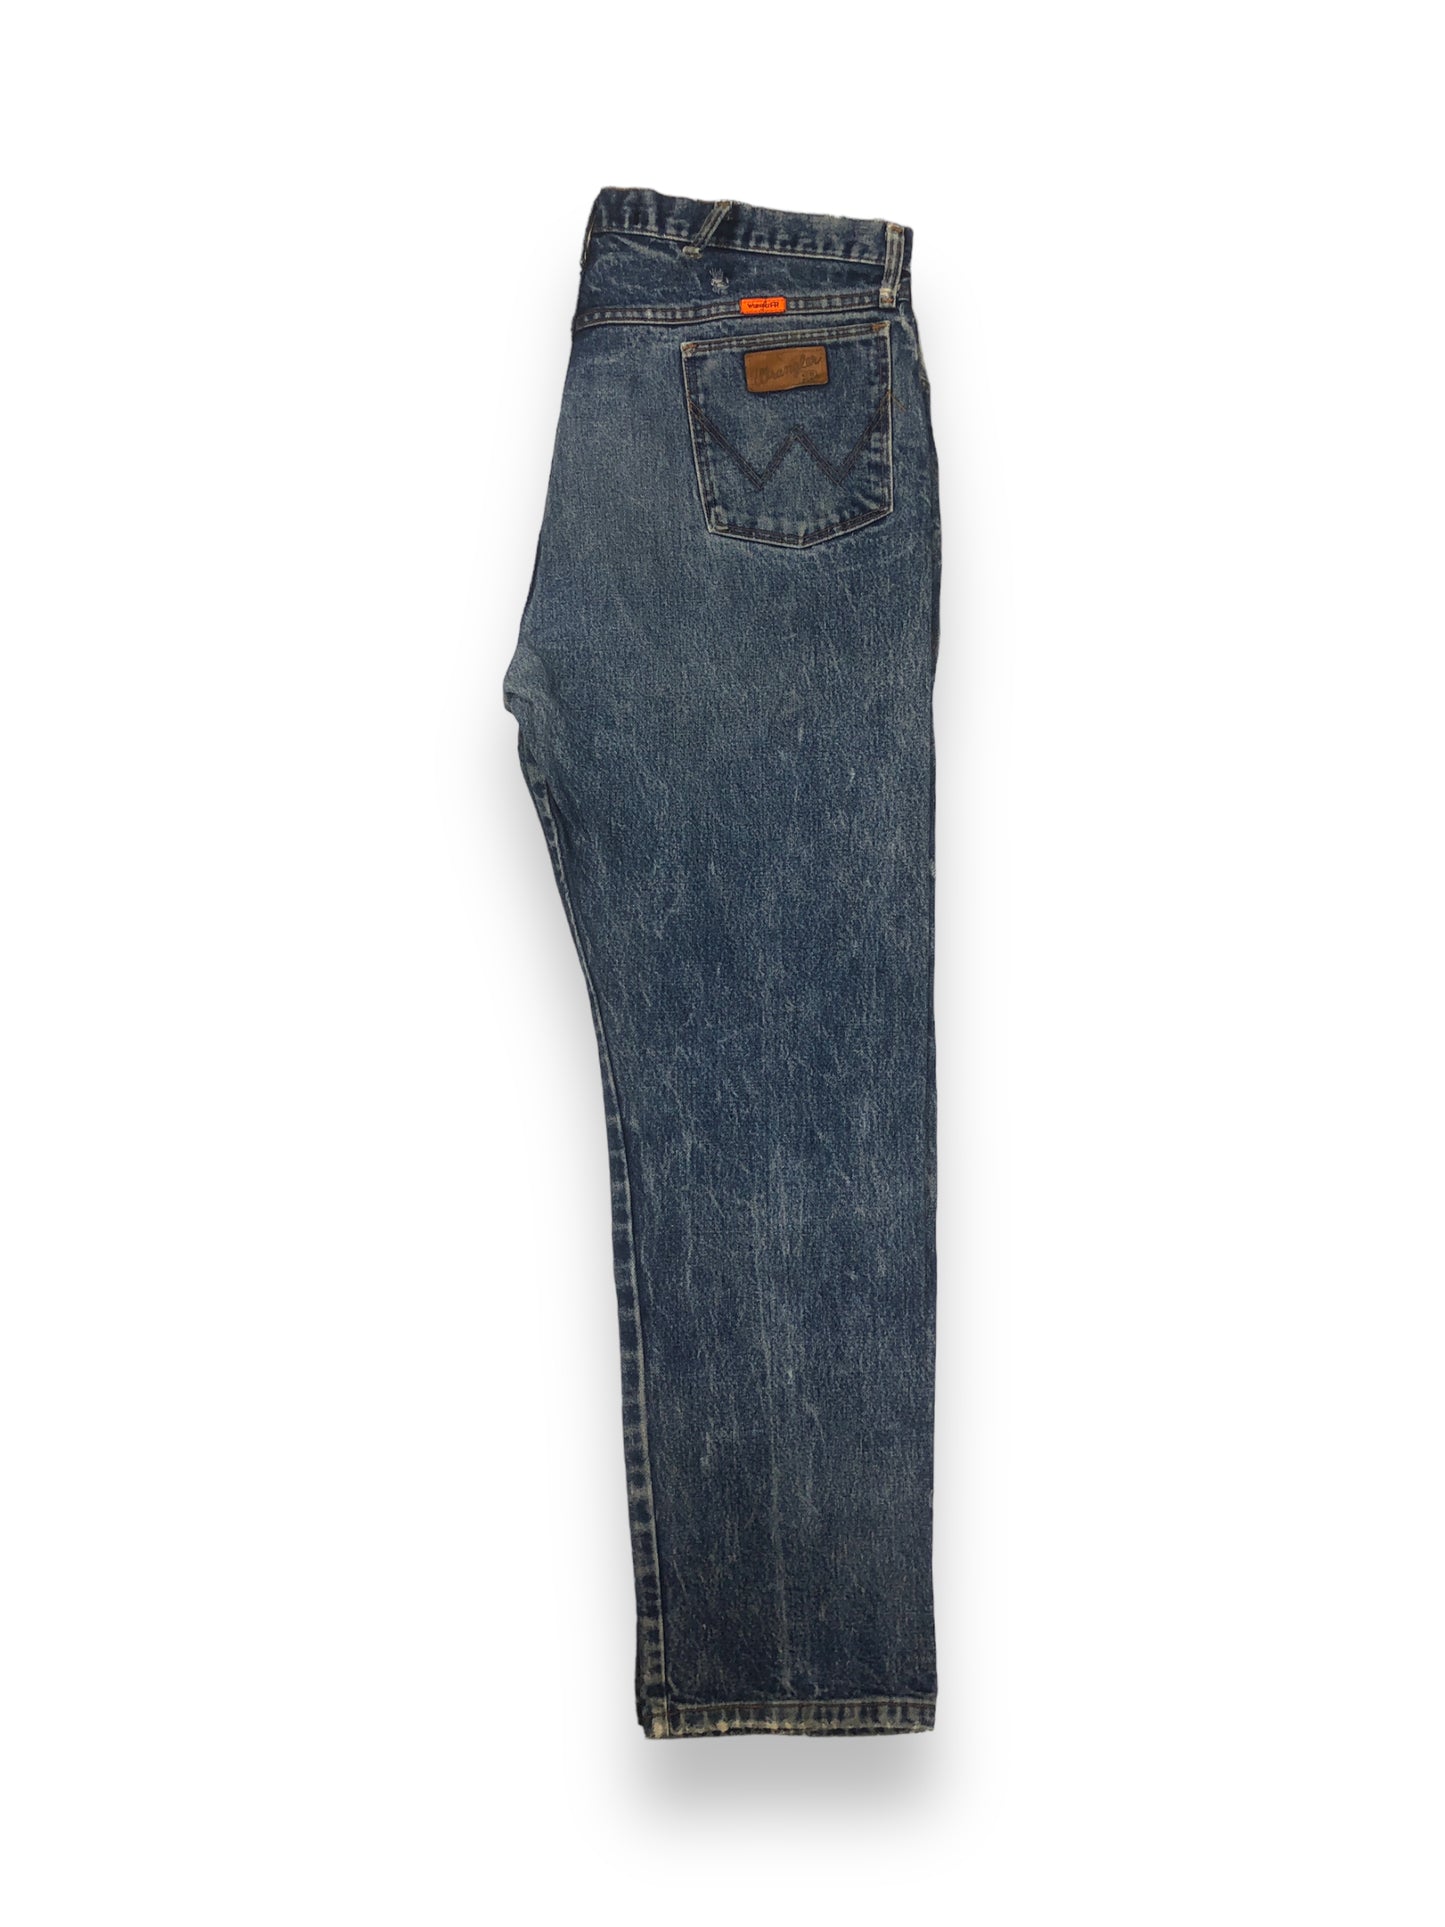 Lee Fireresistance Baggy Jeans